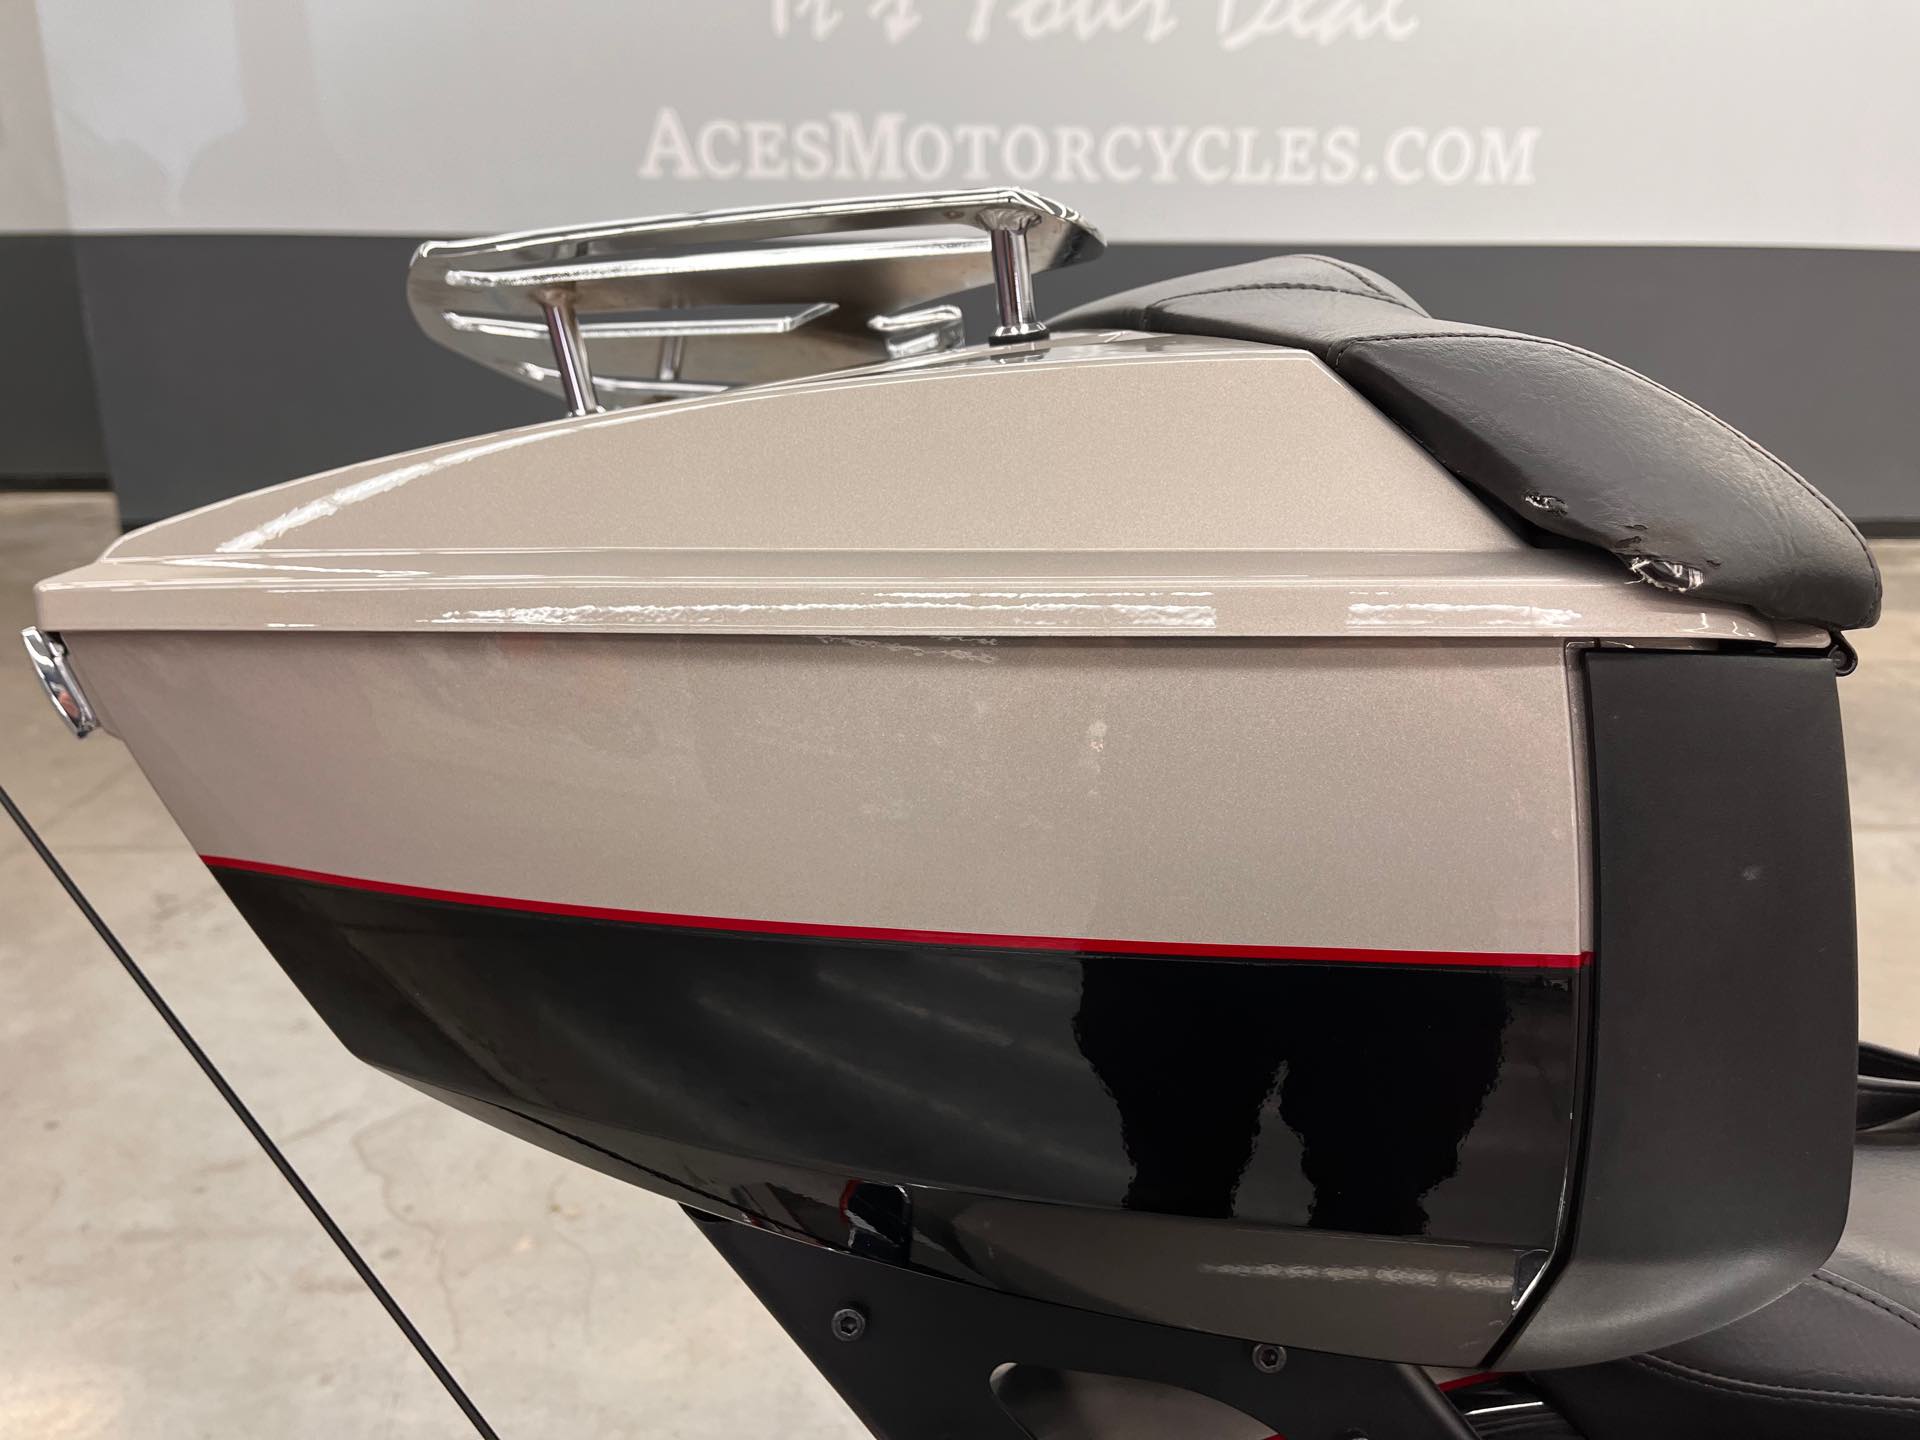 2014 VICTORY Cross Country at Aces Motorcycles - Denver